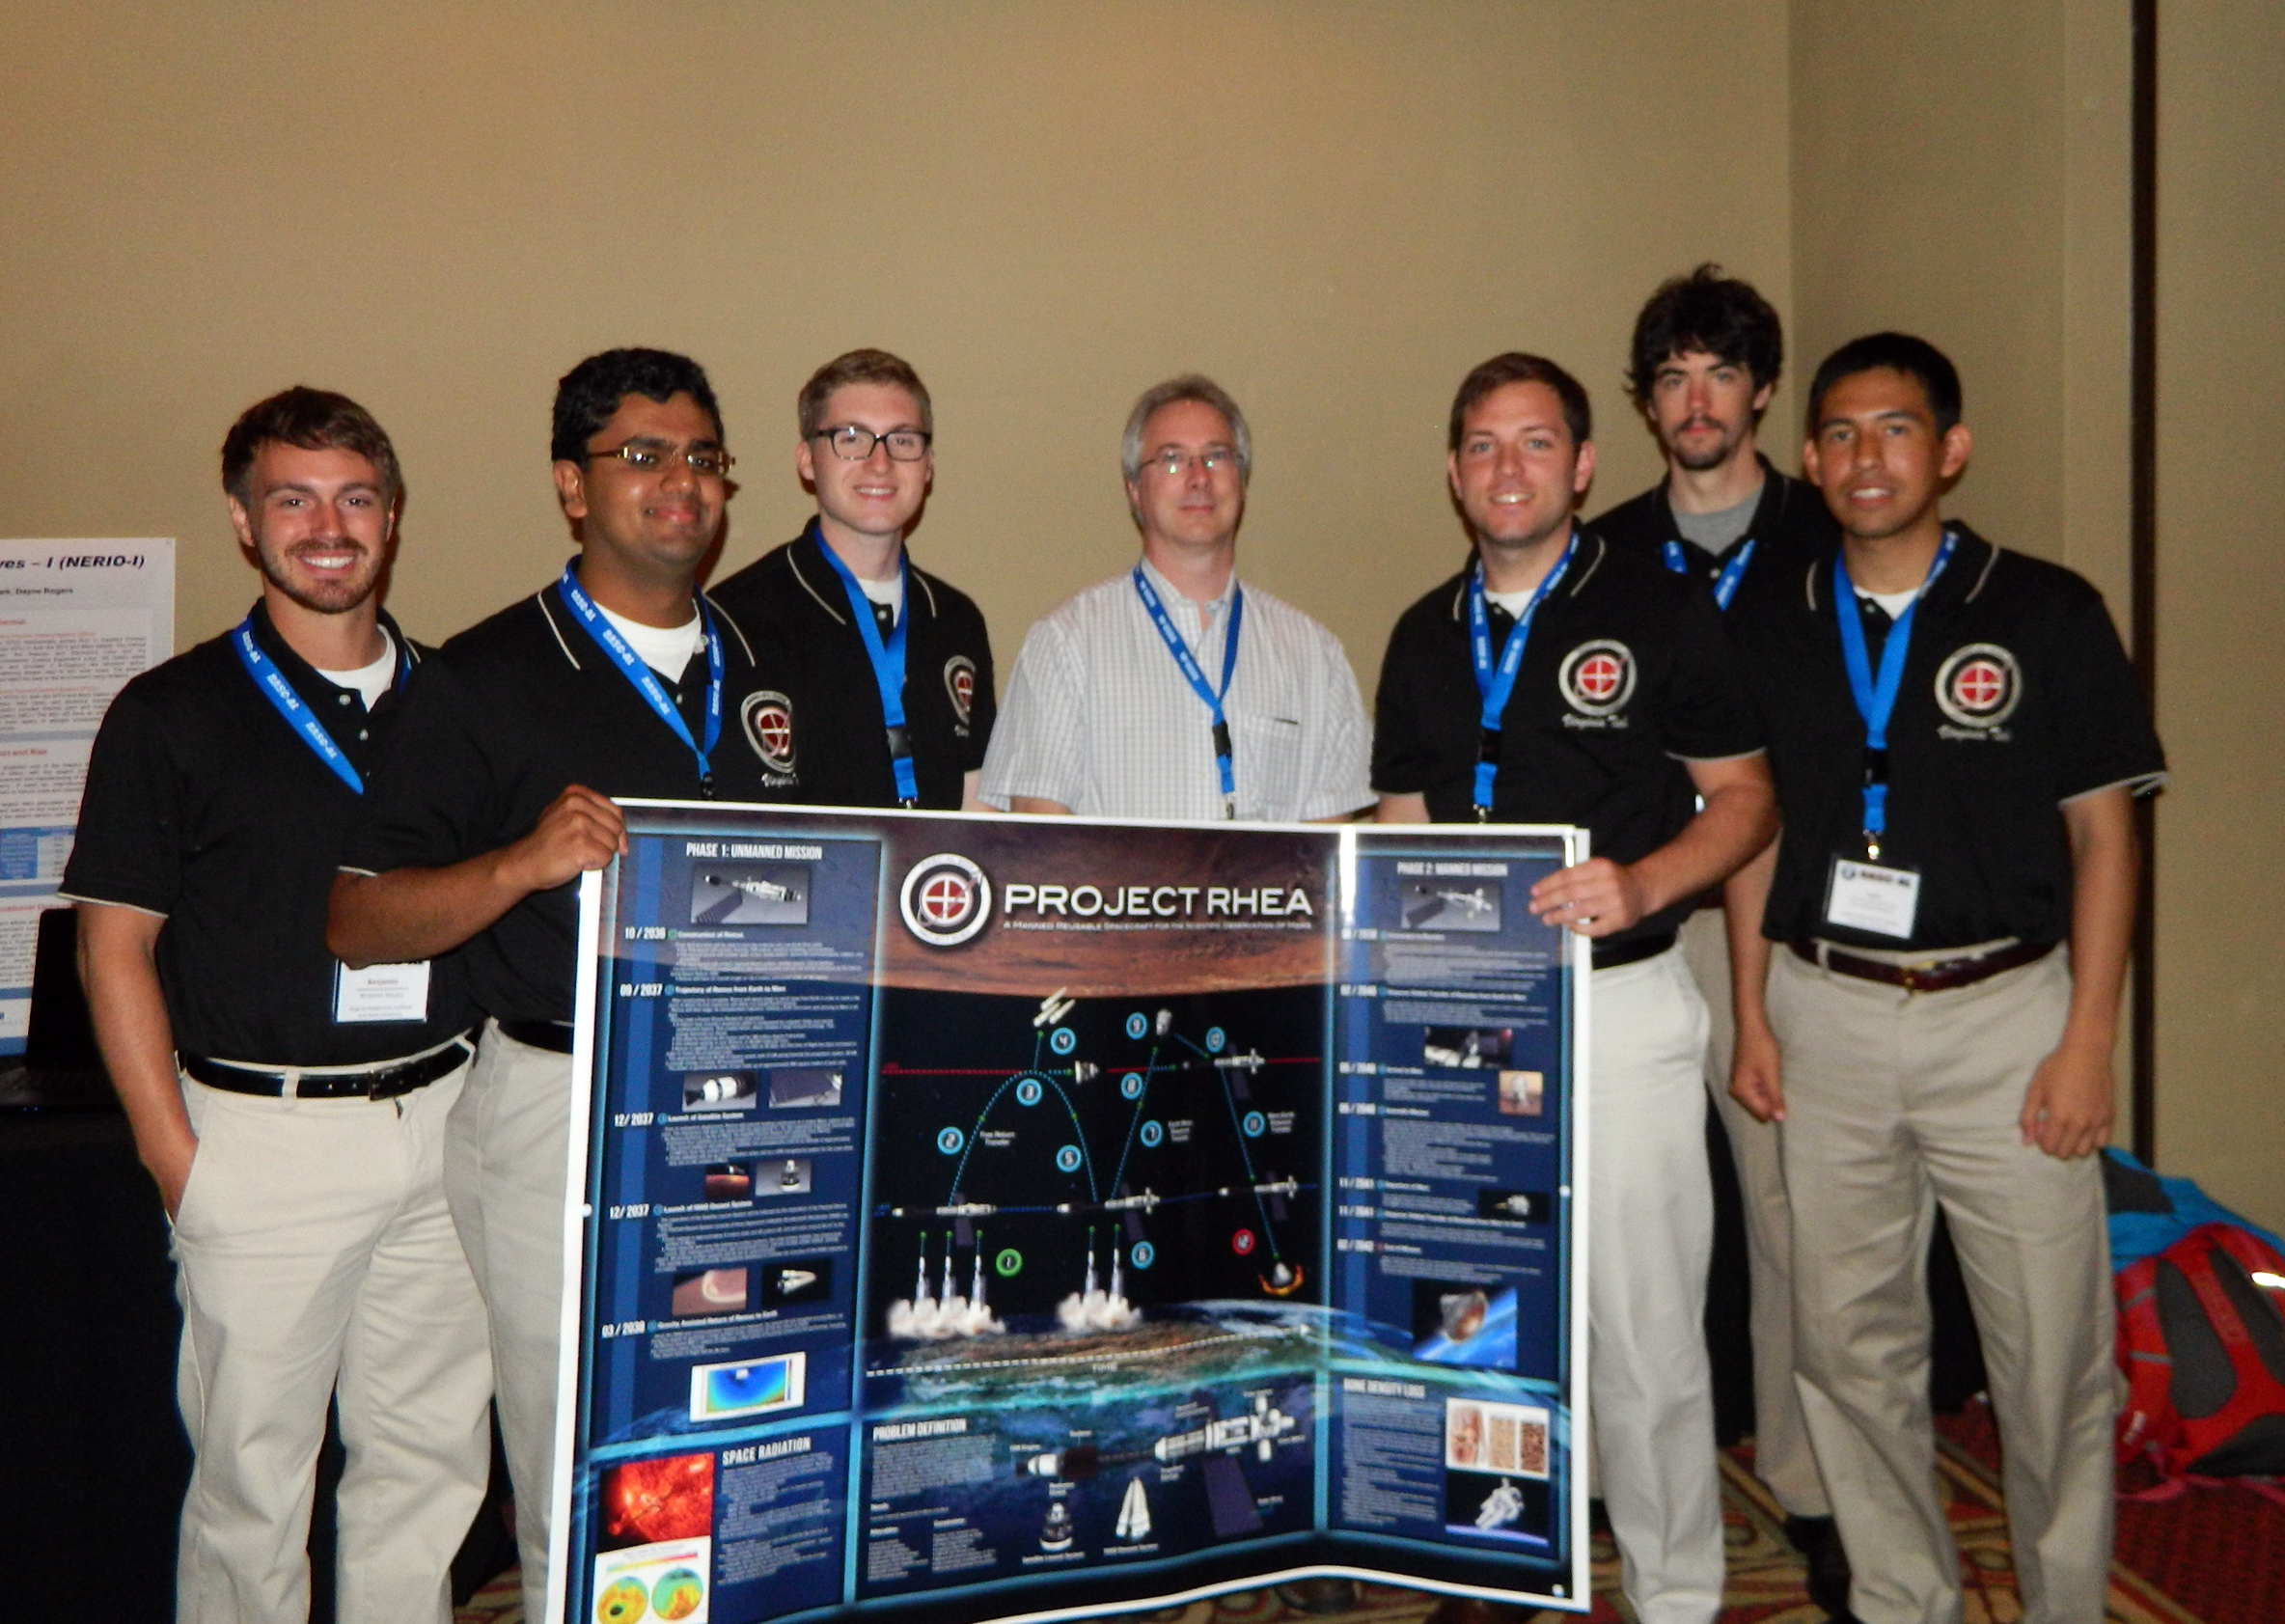 Virginia Tech’s 2013 Revolutionary Aerospace Systems Concepts-Academic Linkage team pose with their winning poster